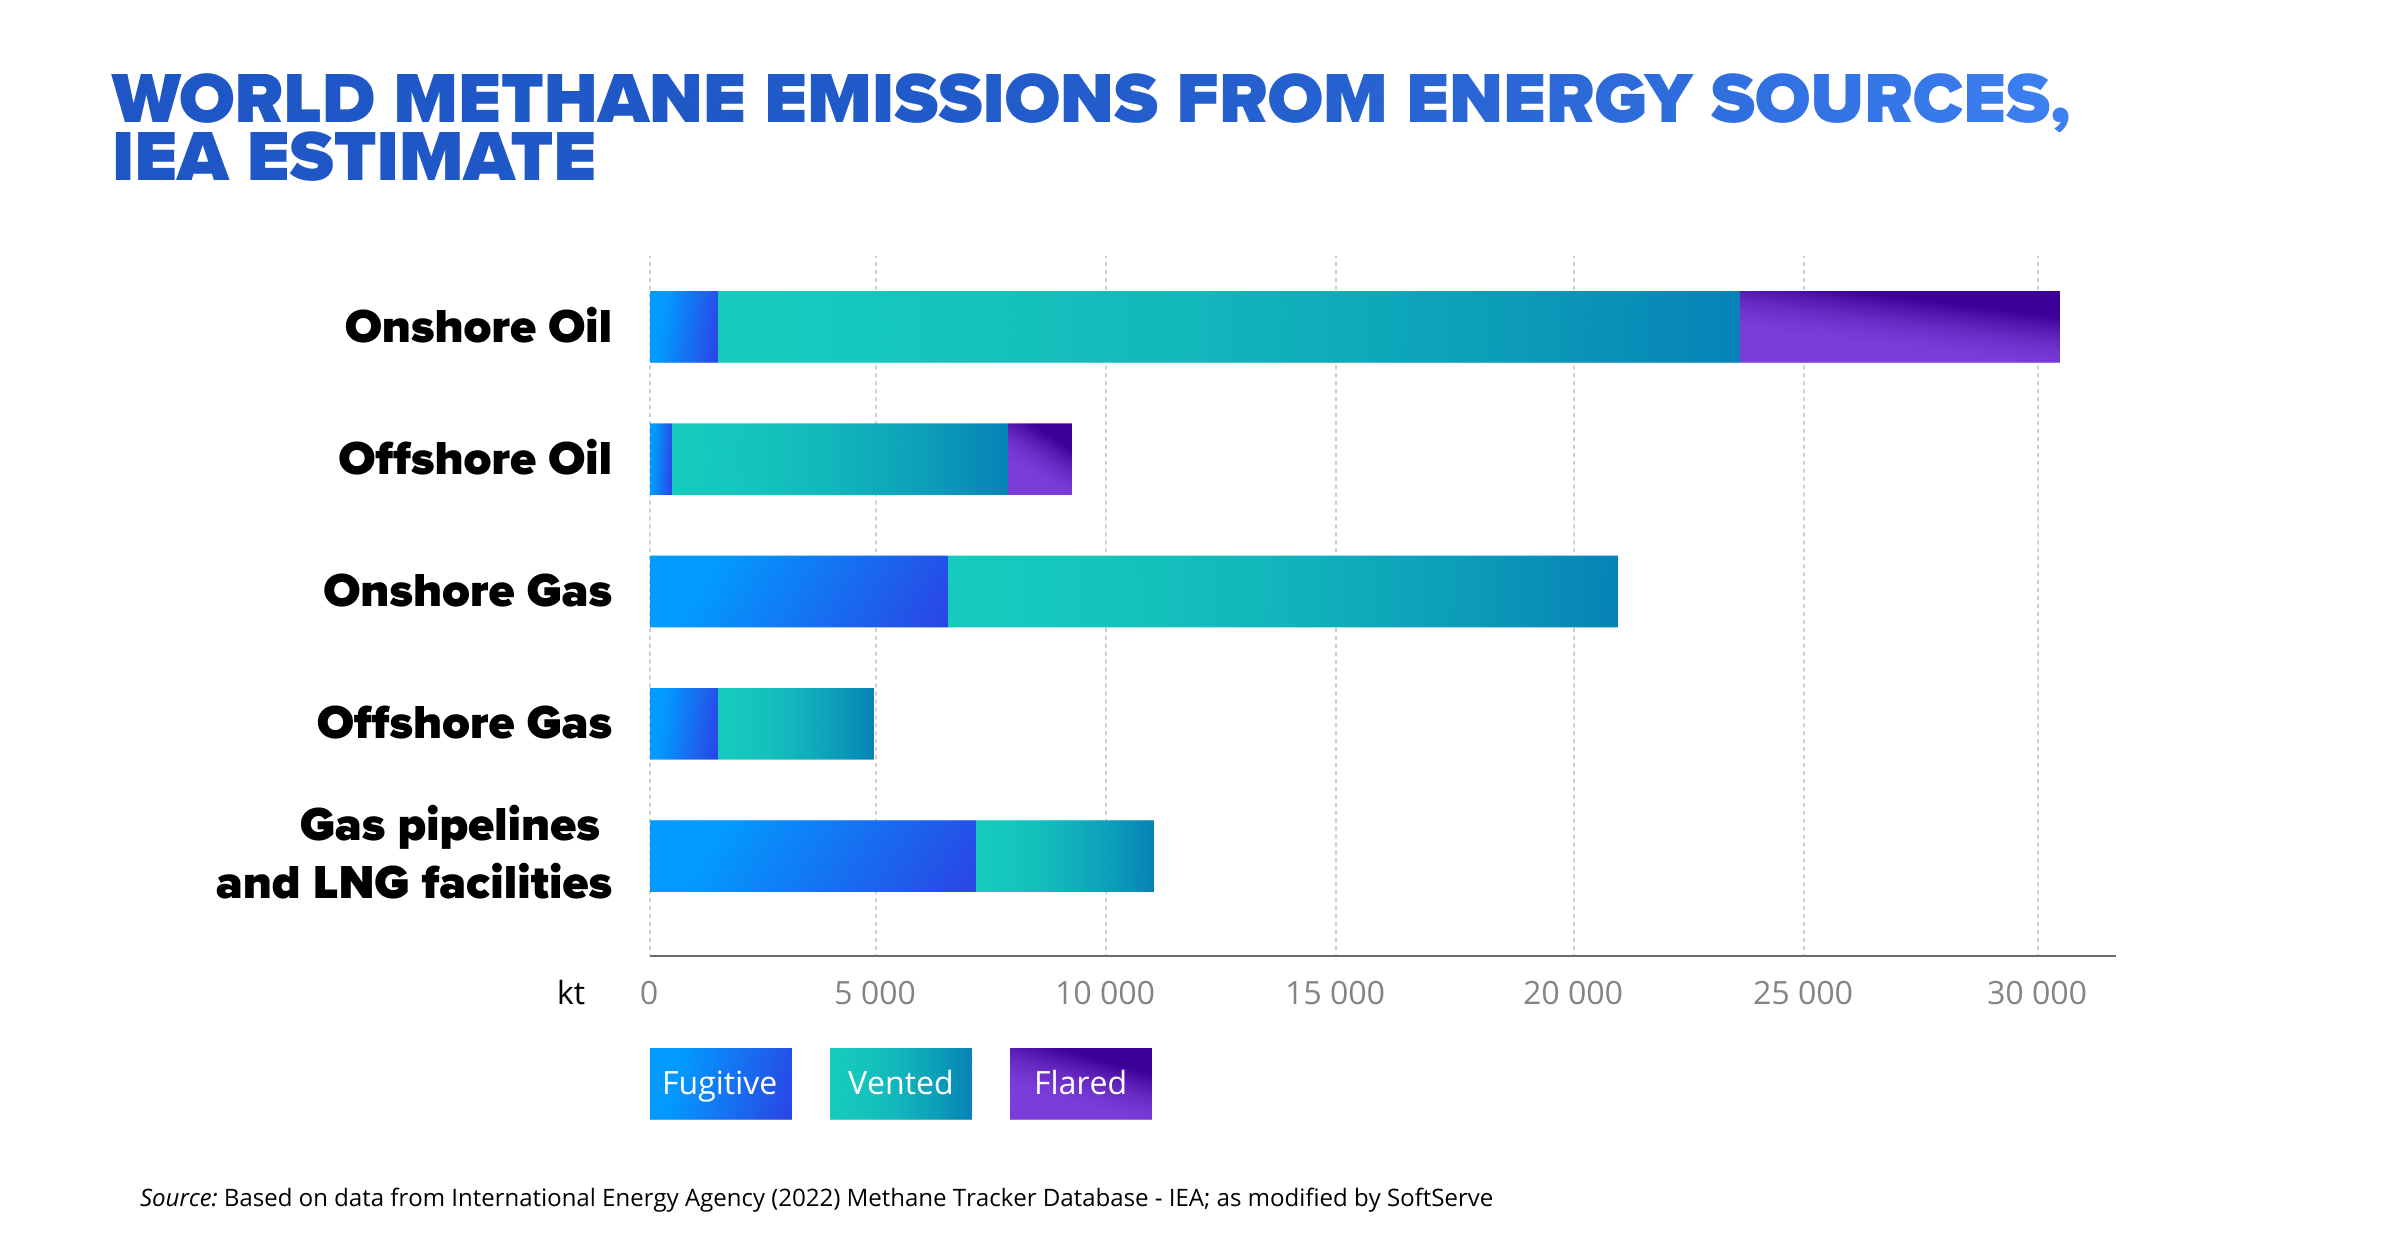 World methane emissions from energy sources, IEA estimate